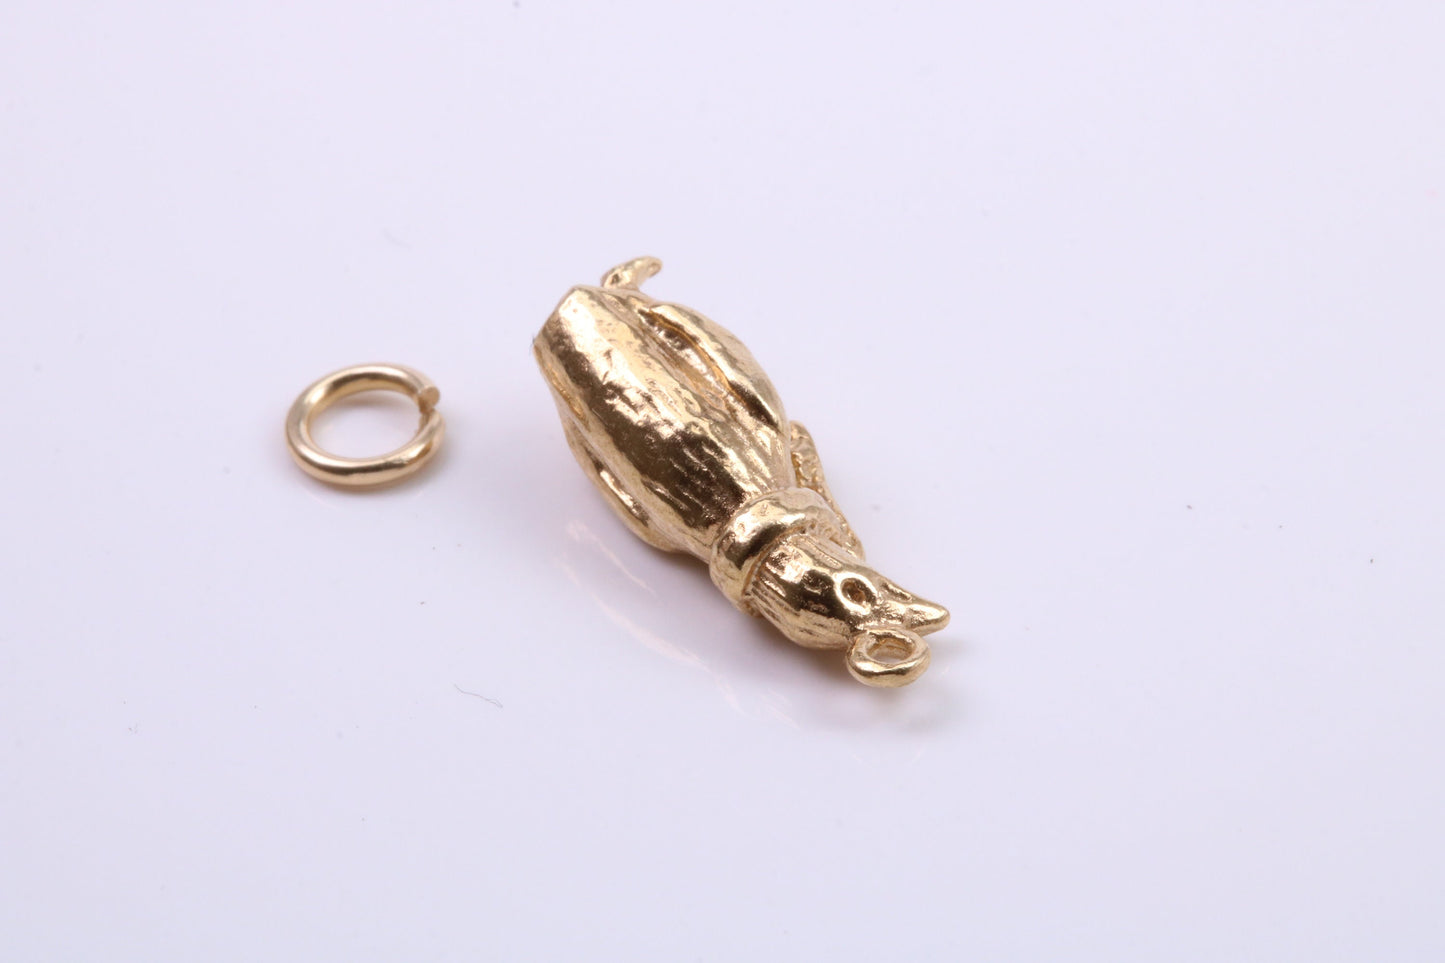 Penguin Charm, Traditional Charm, Made from Solid 9ct Yellow Gold, British Hallmarked, Complete with Attachment Link